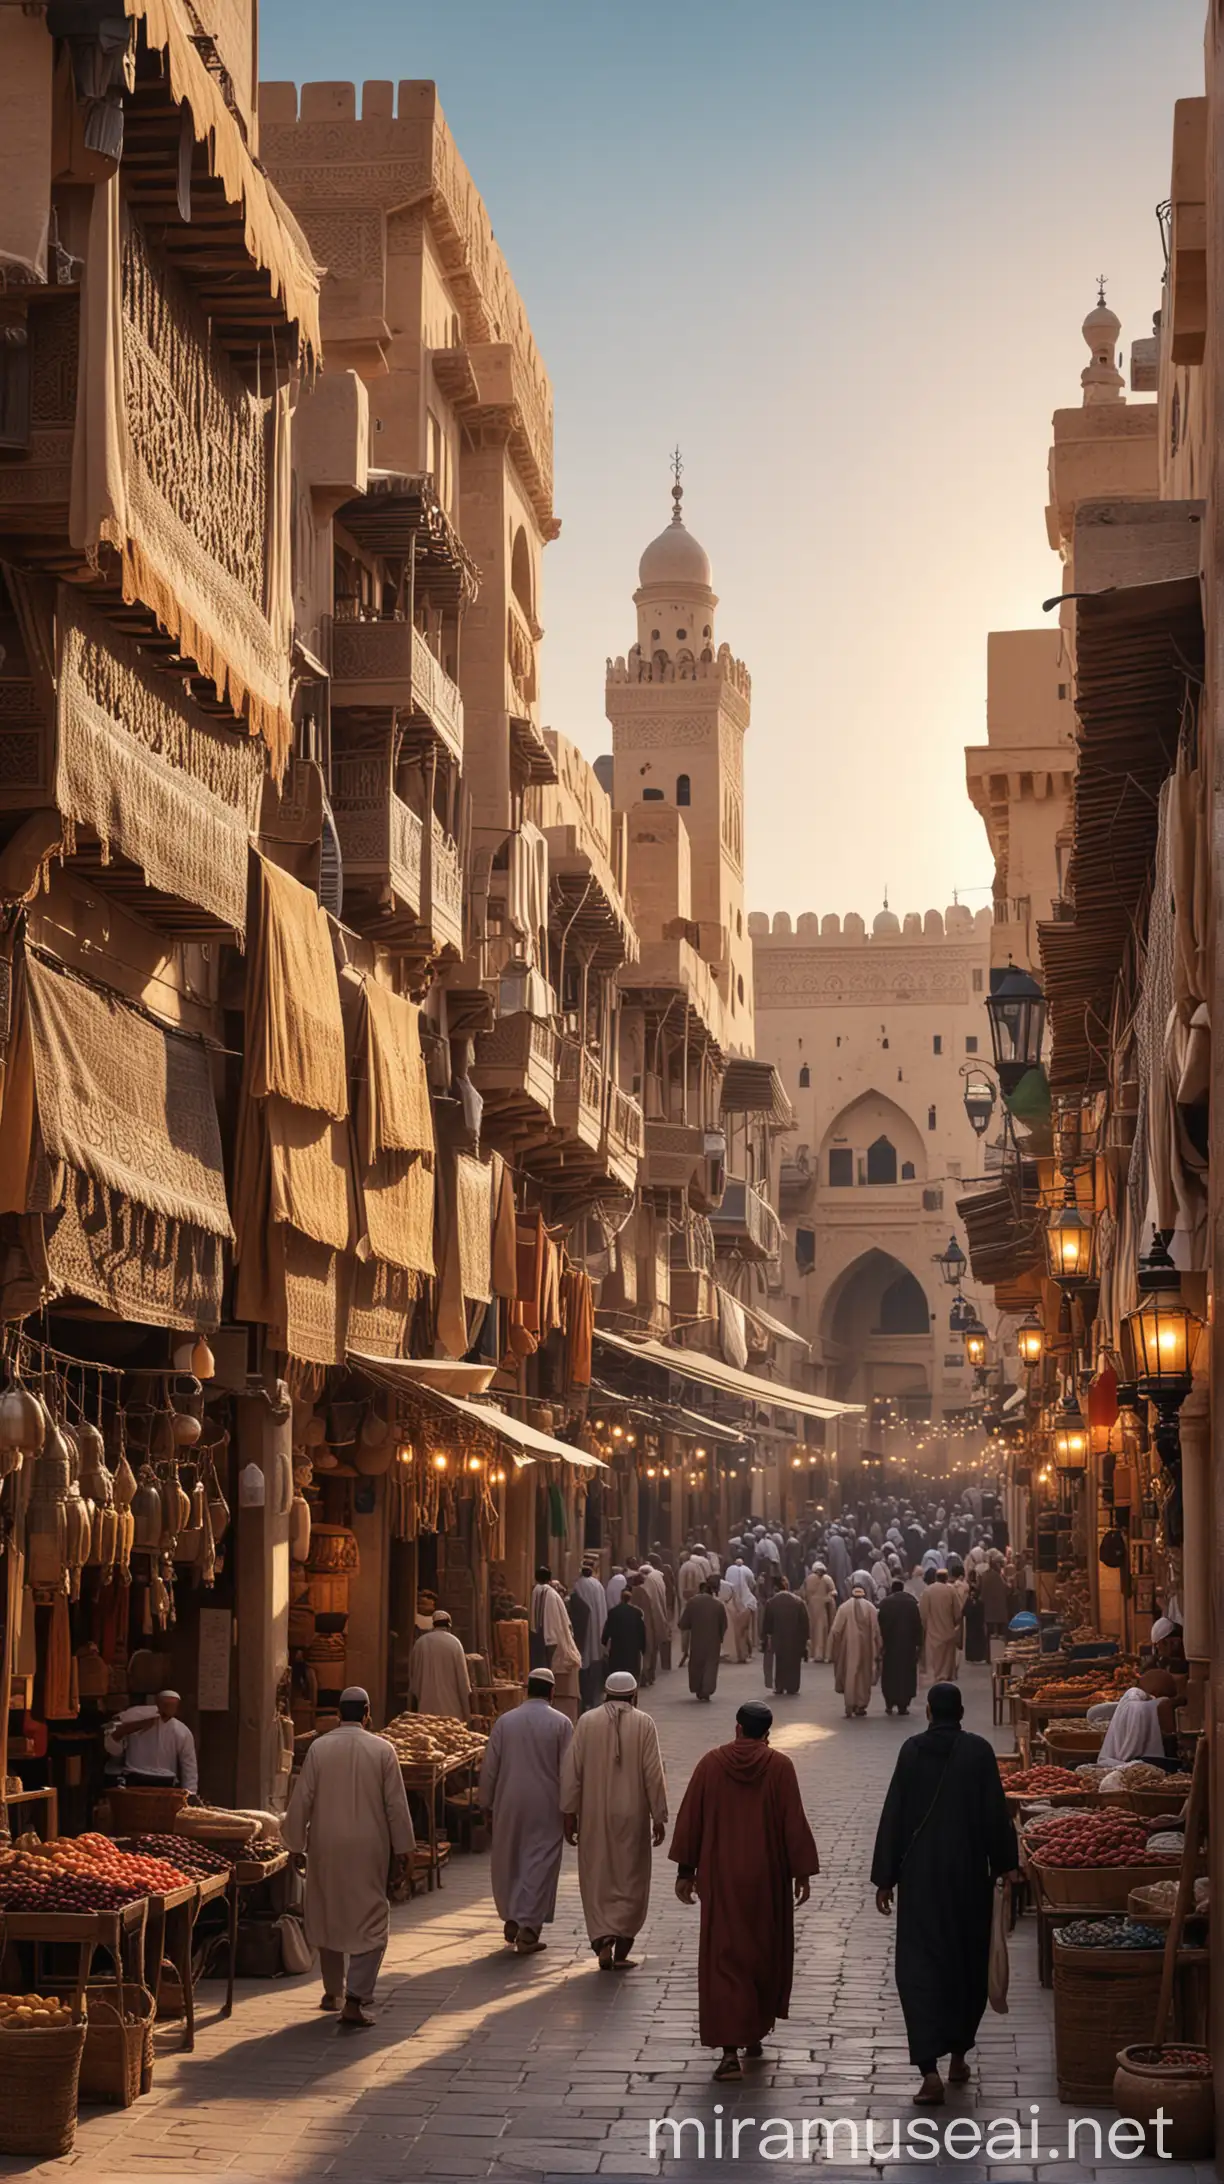 Vibrant Islamic Marketplace in Ancient Medina with Merchants and Shoppers